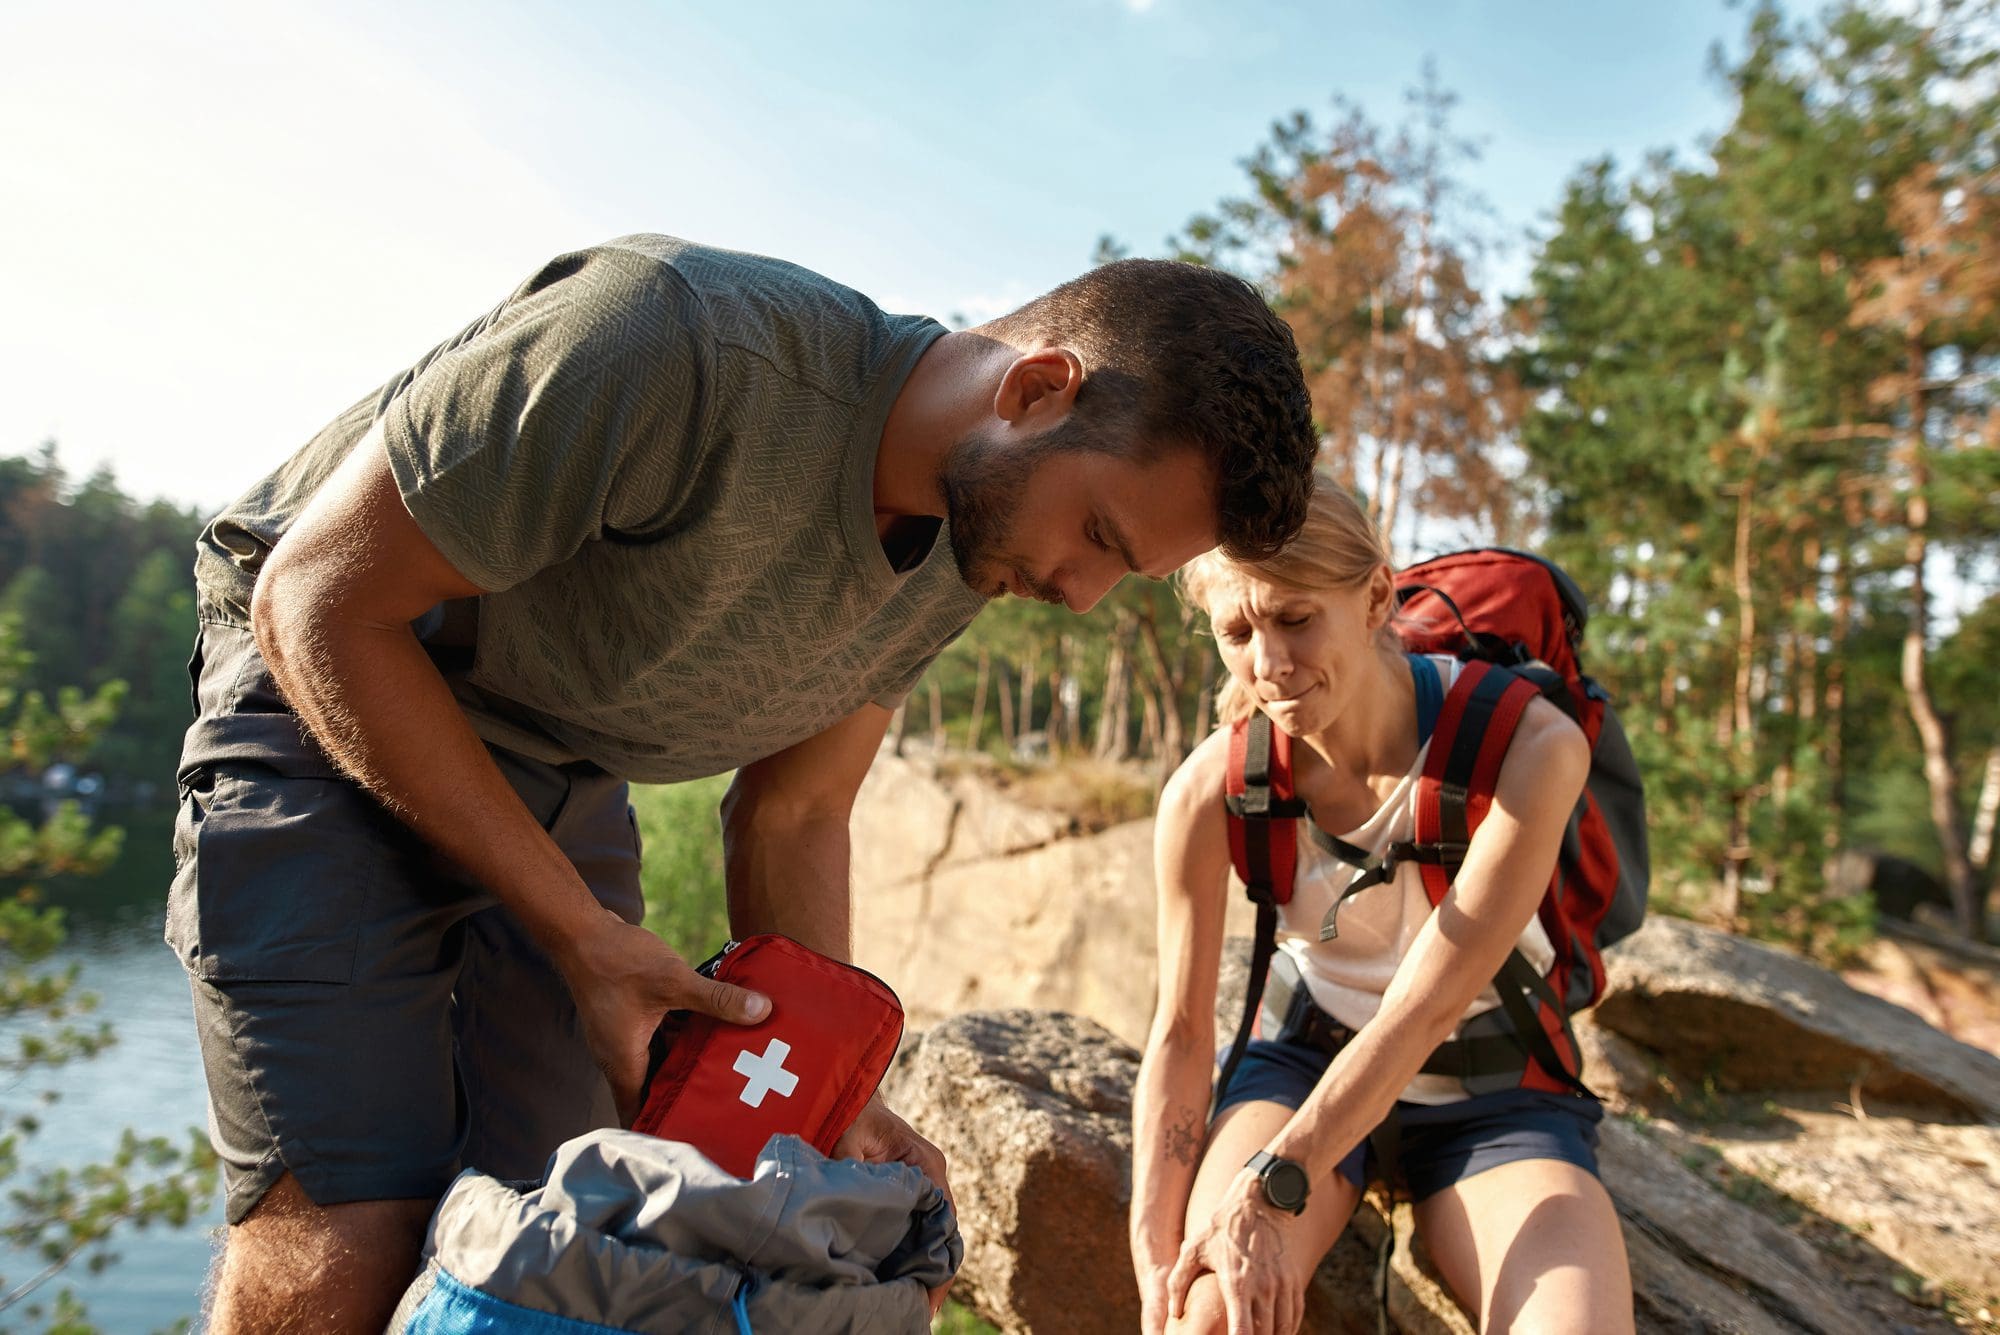 Participate in a first aid course in Toowoomba and learn key skills to tackling any emergency.